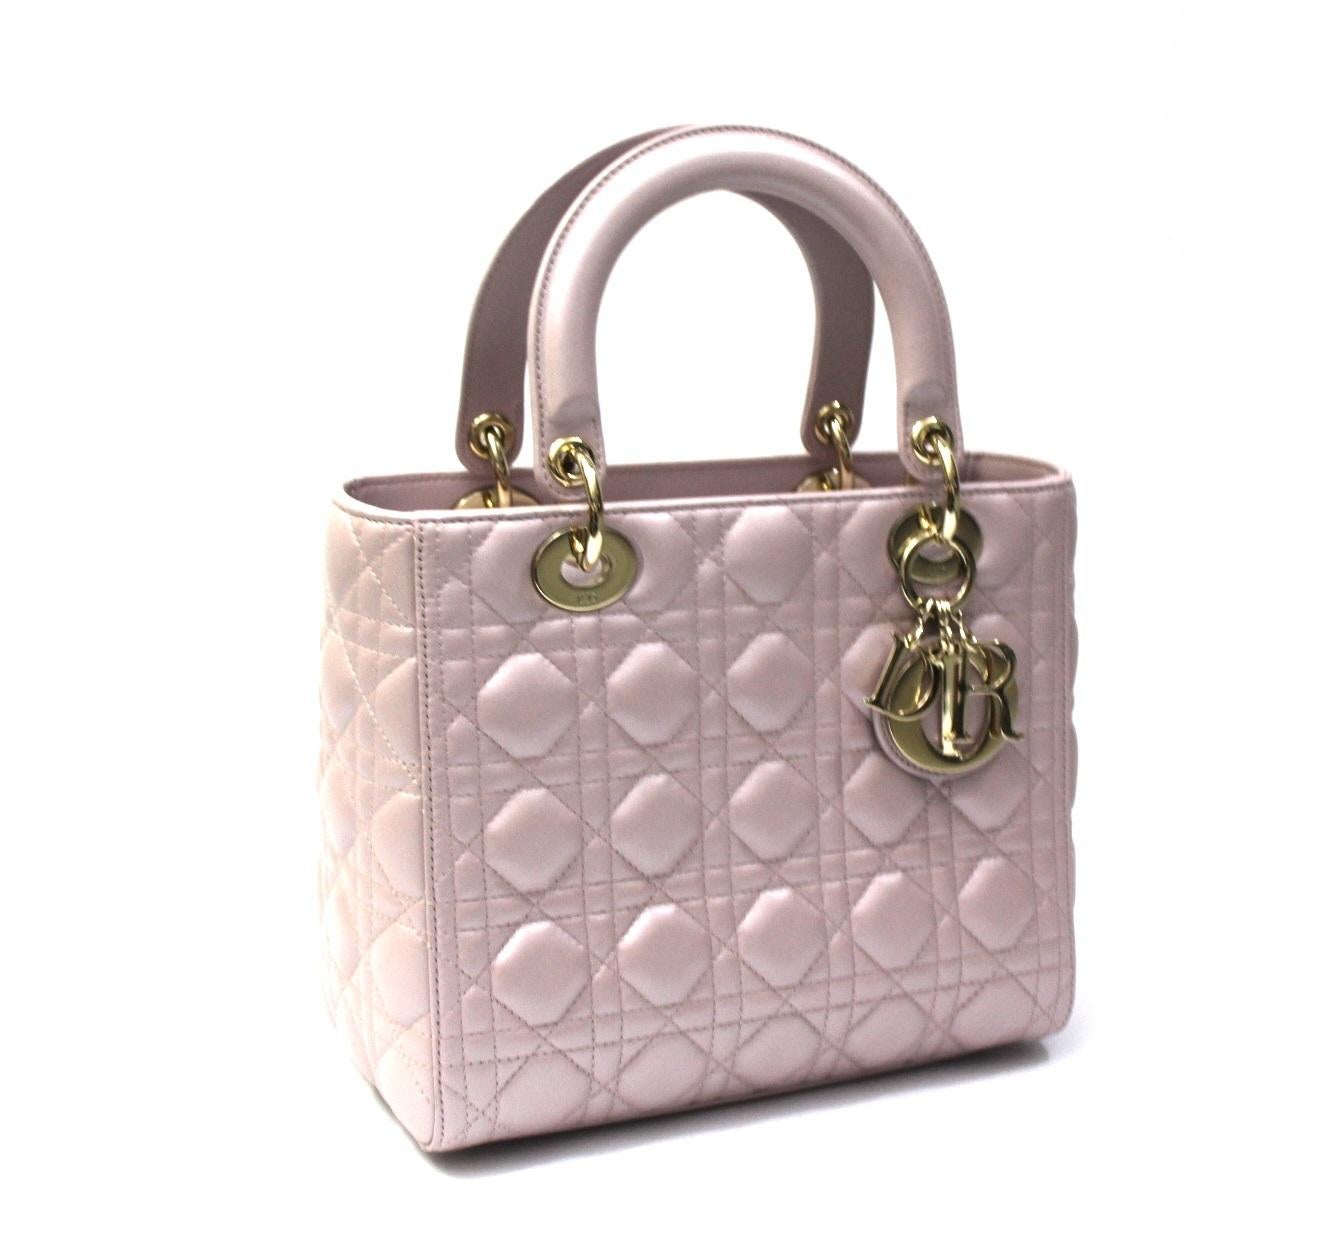 Dior Lady model bag made of soft pink leather with golden hardware.
Equipped with double leather handle and removable shoulder strap.
Flap closure, internally quite roomy.
Conditions like new.